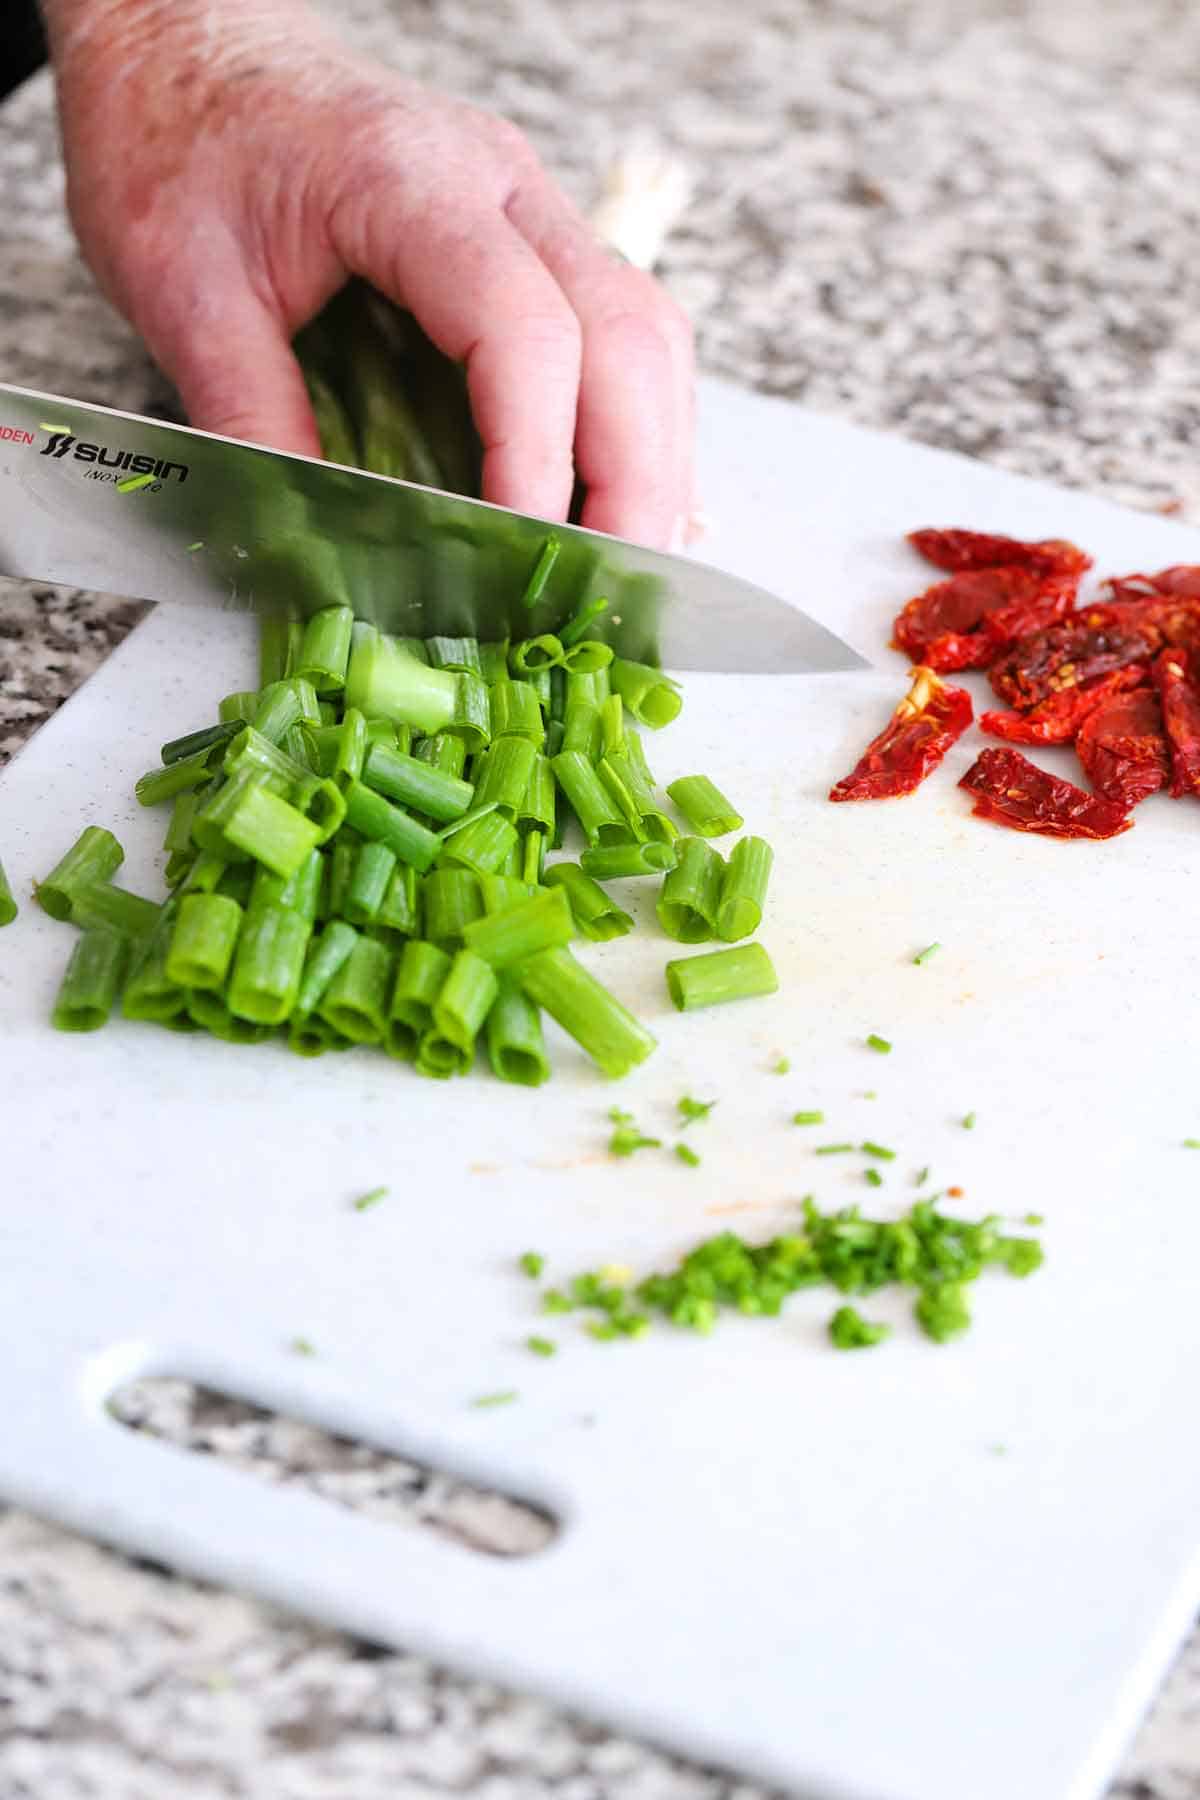 Image shows someone chopping green onions on a cutting board.